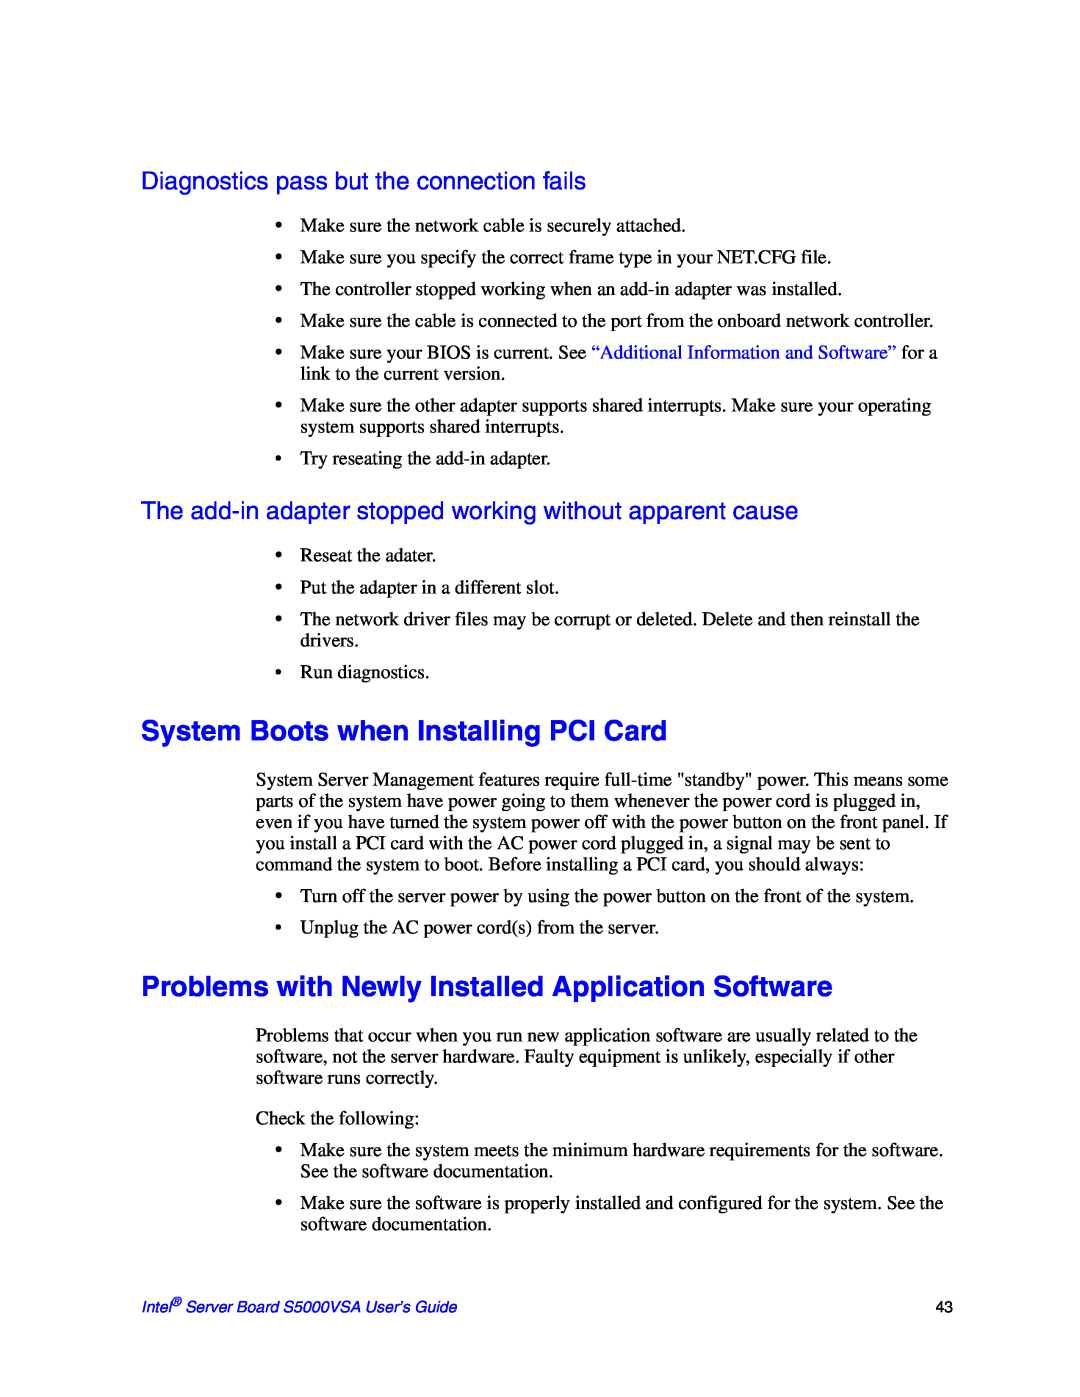 Intel S5000VSA manual System Boots when Installing PCI Card, Problems with Newly Installed Application Software 